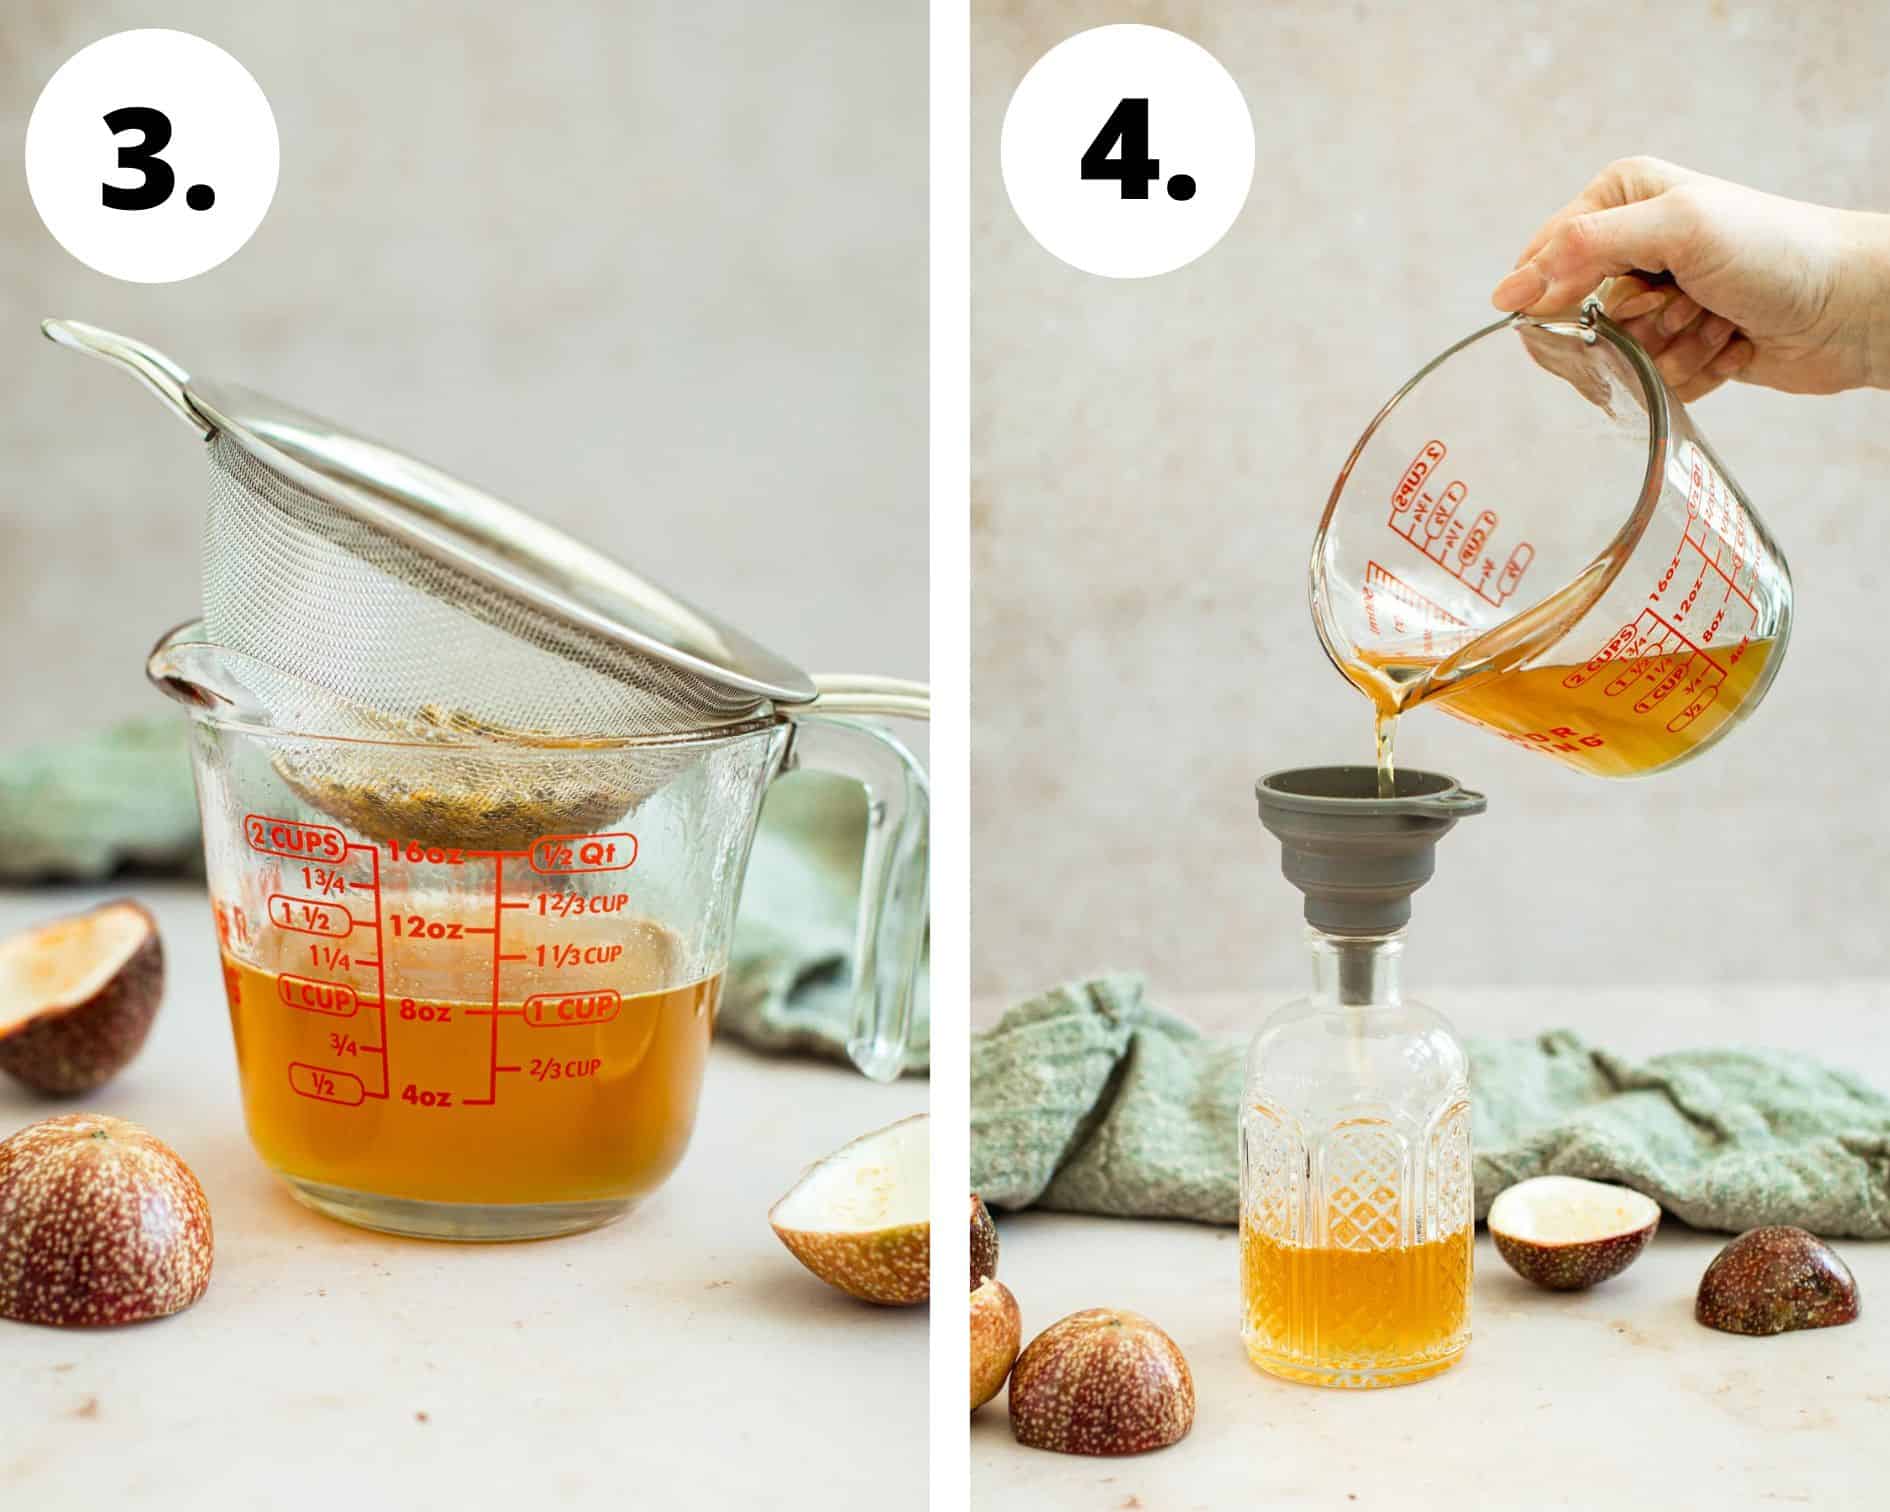 Passion fruit syrup process steps 3 and 4.